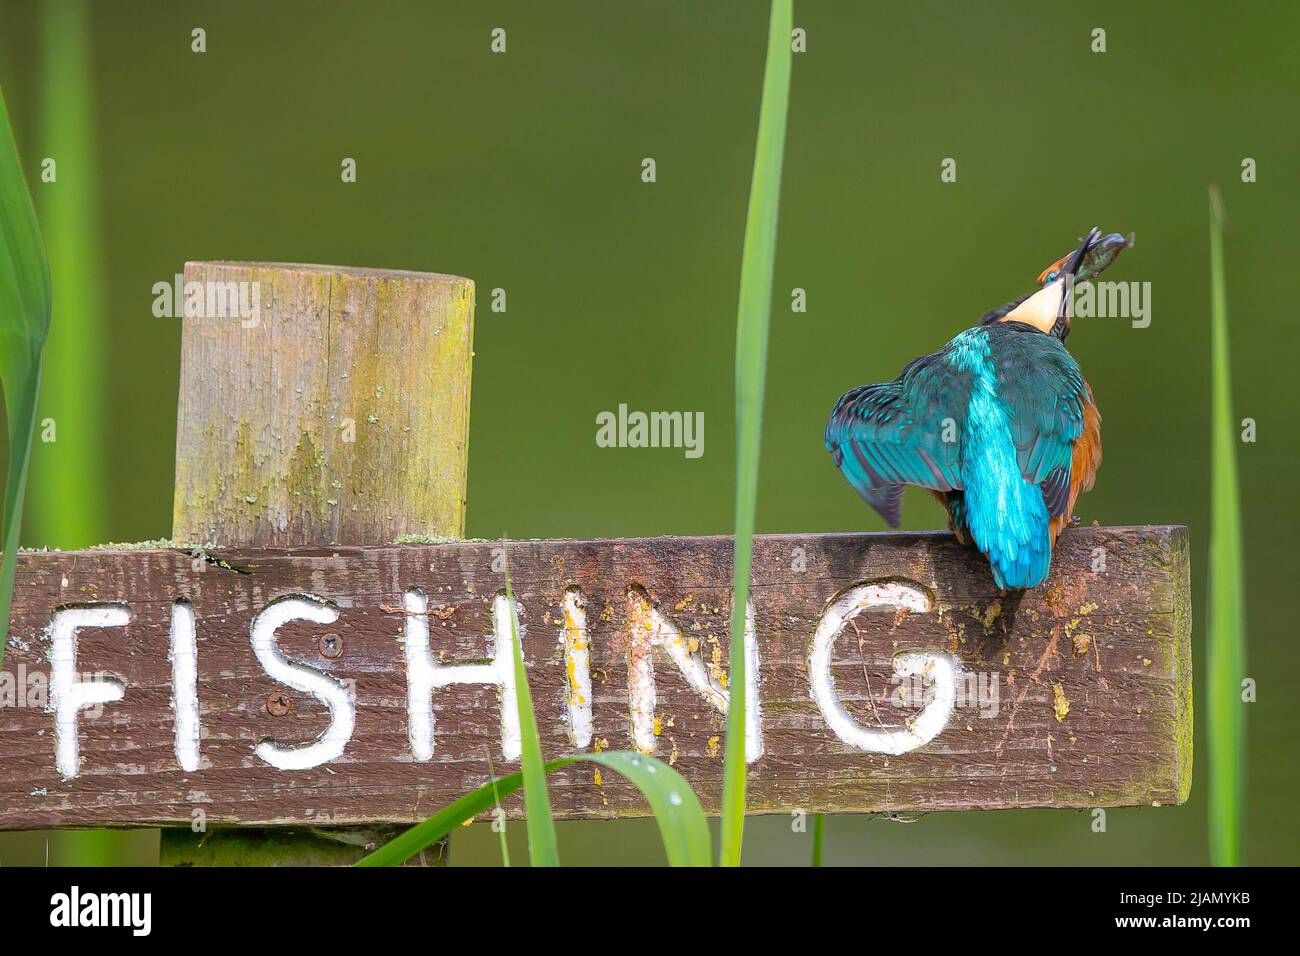 Kidderminster, UK. 31st May, 2022. UK weather: sunny bright spells inbetween some light showers offer this kingfisher a little riverbank fishing time. Credit: Lee Hudson/Alamy Live News Stock Photo